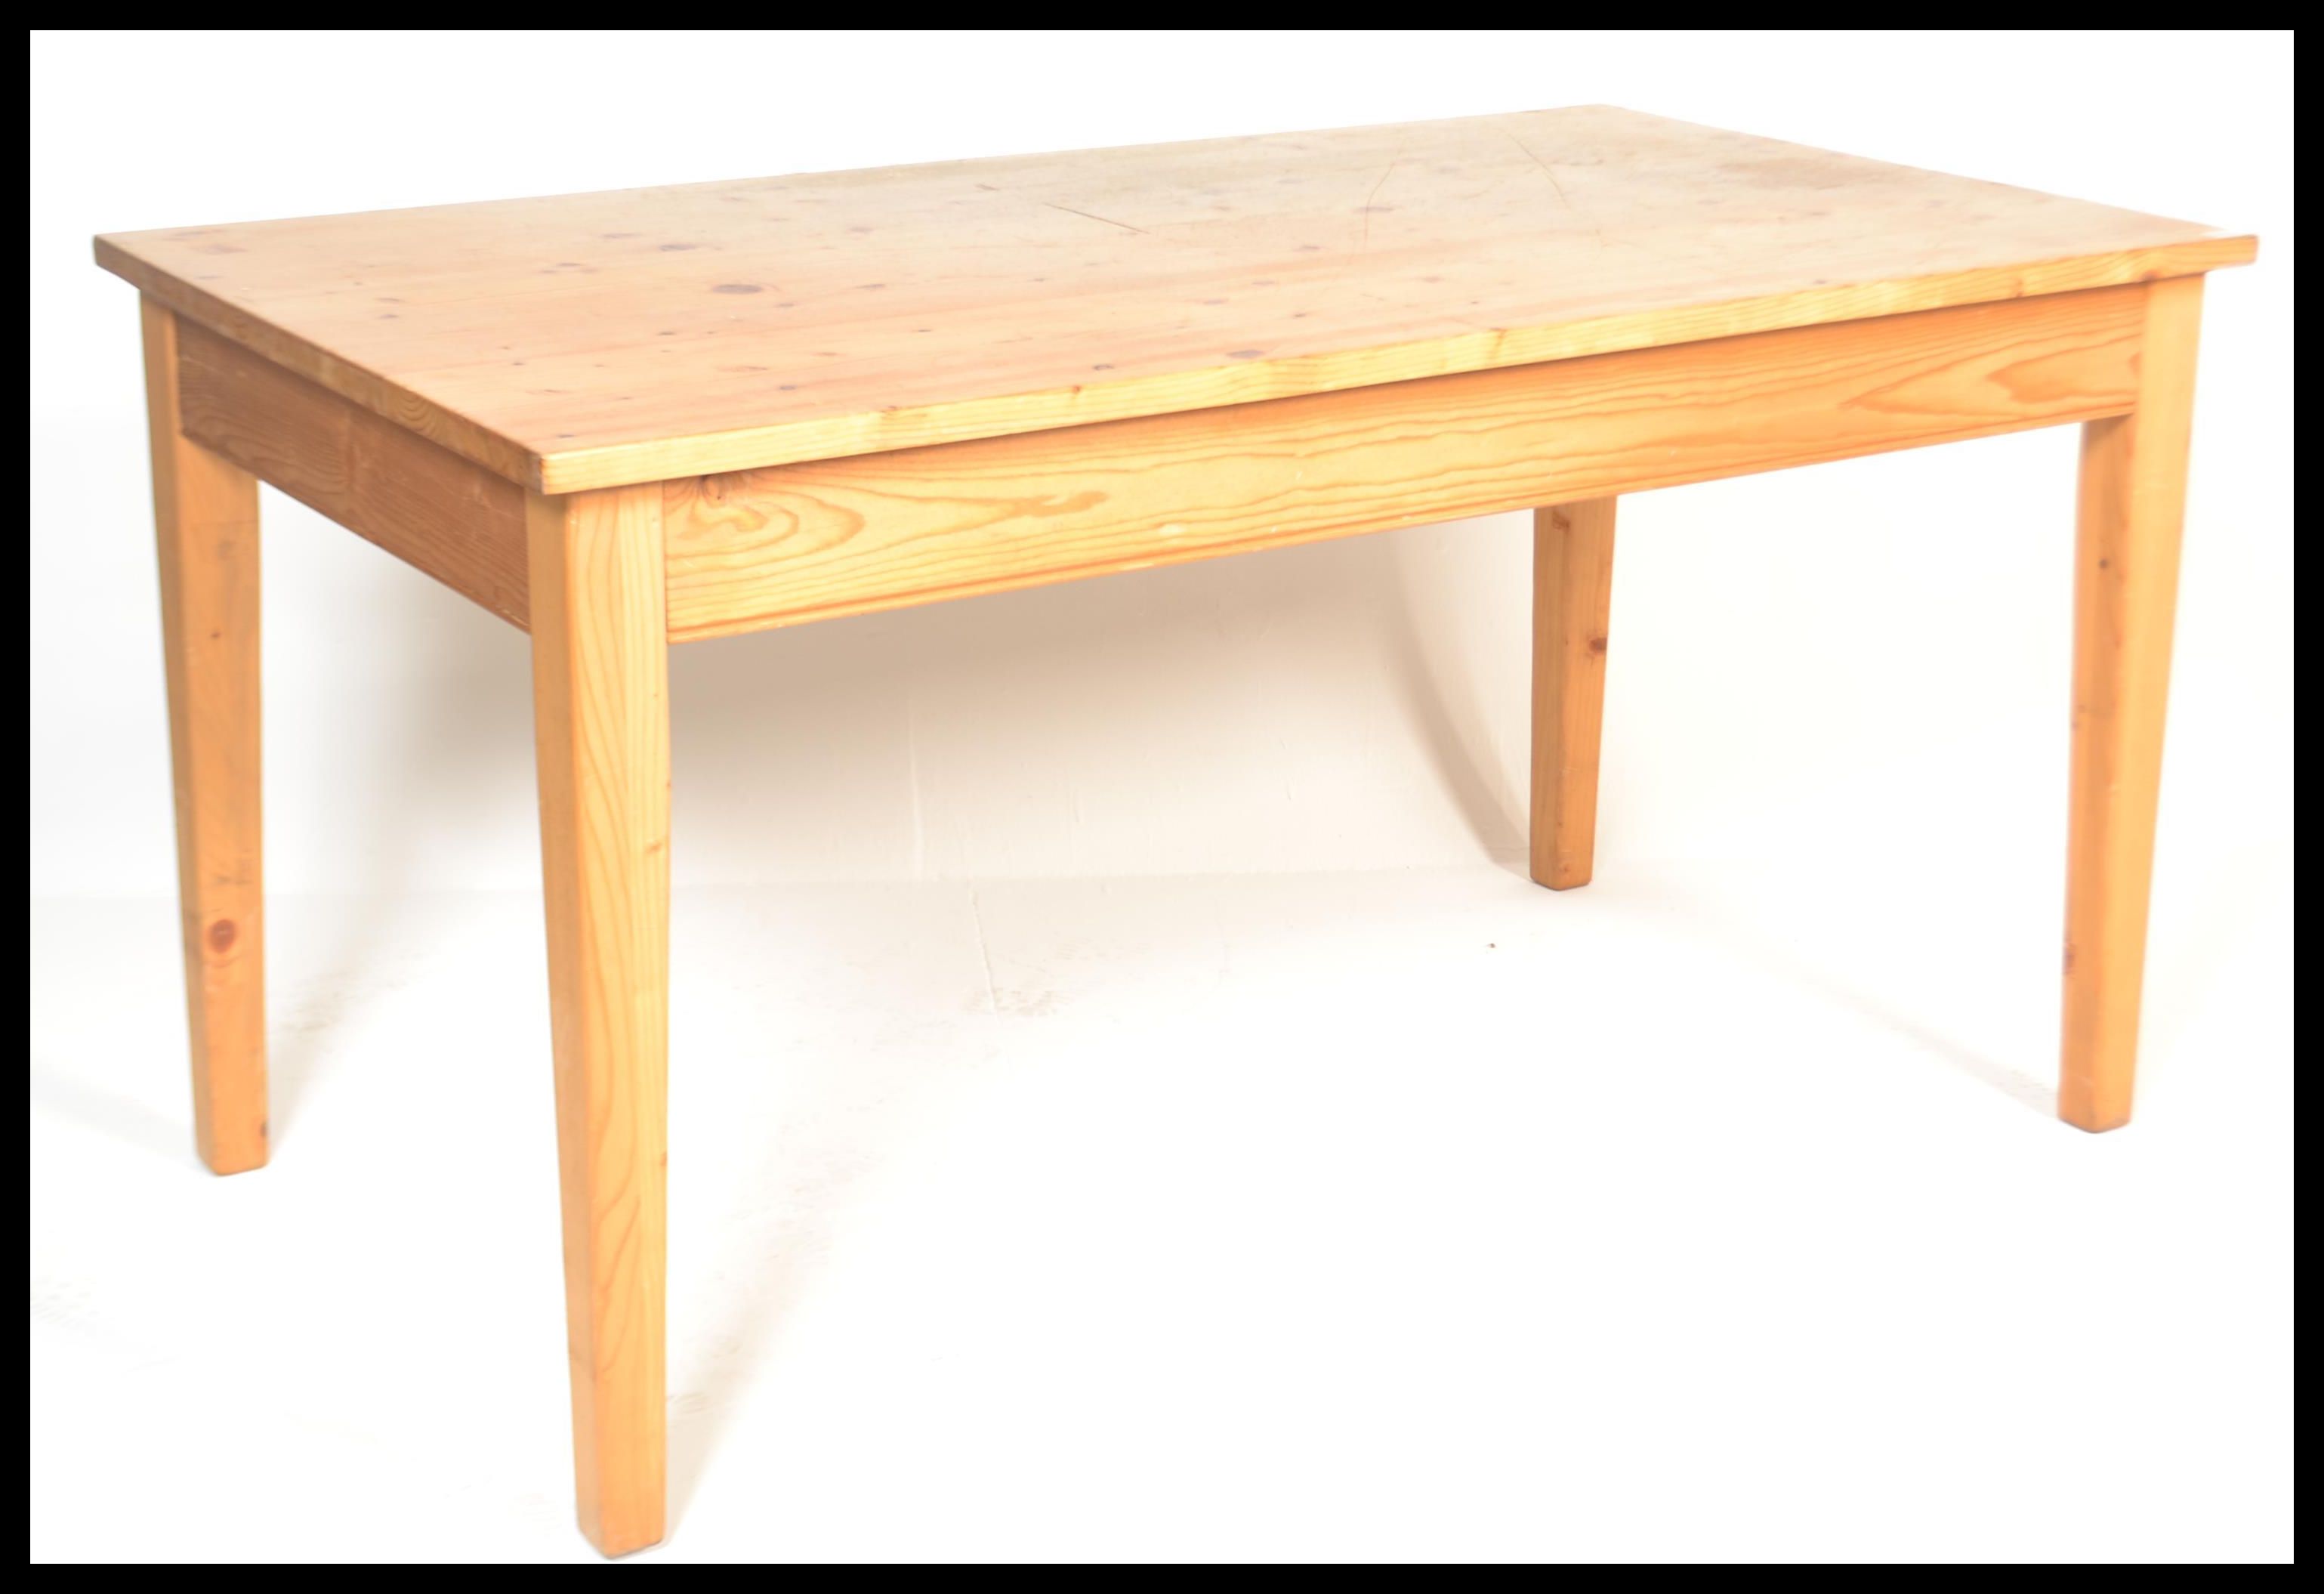 A 20th century antique style pine farmhouse dining table of rectangular form with thick plank top, - Image 2 of 4